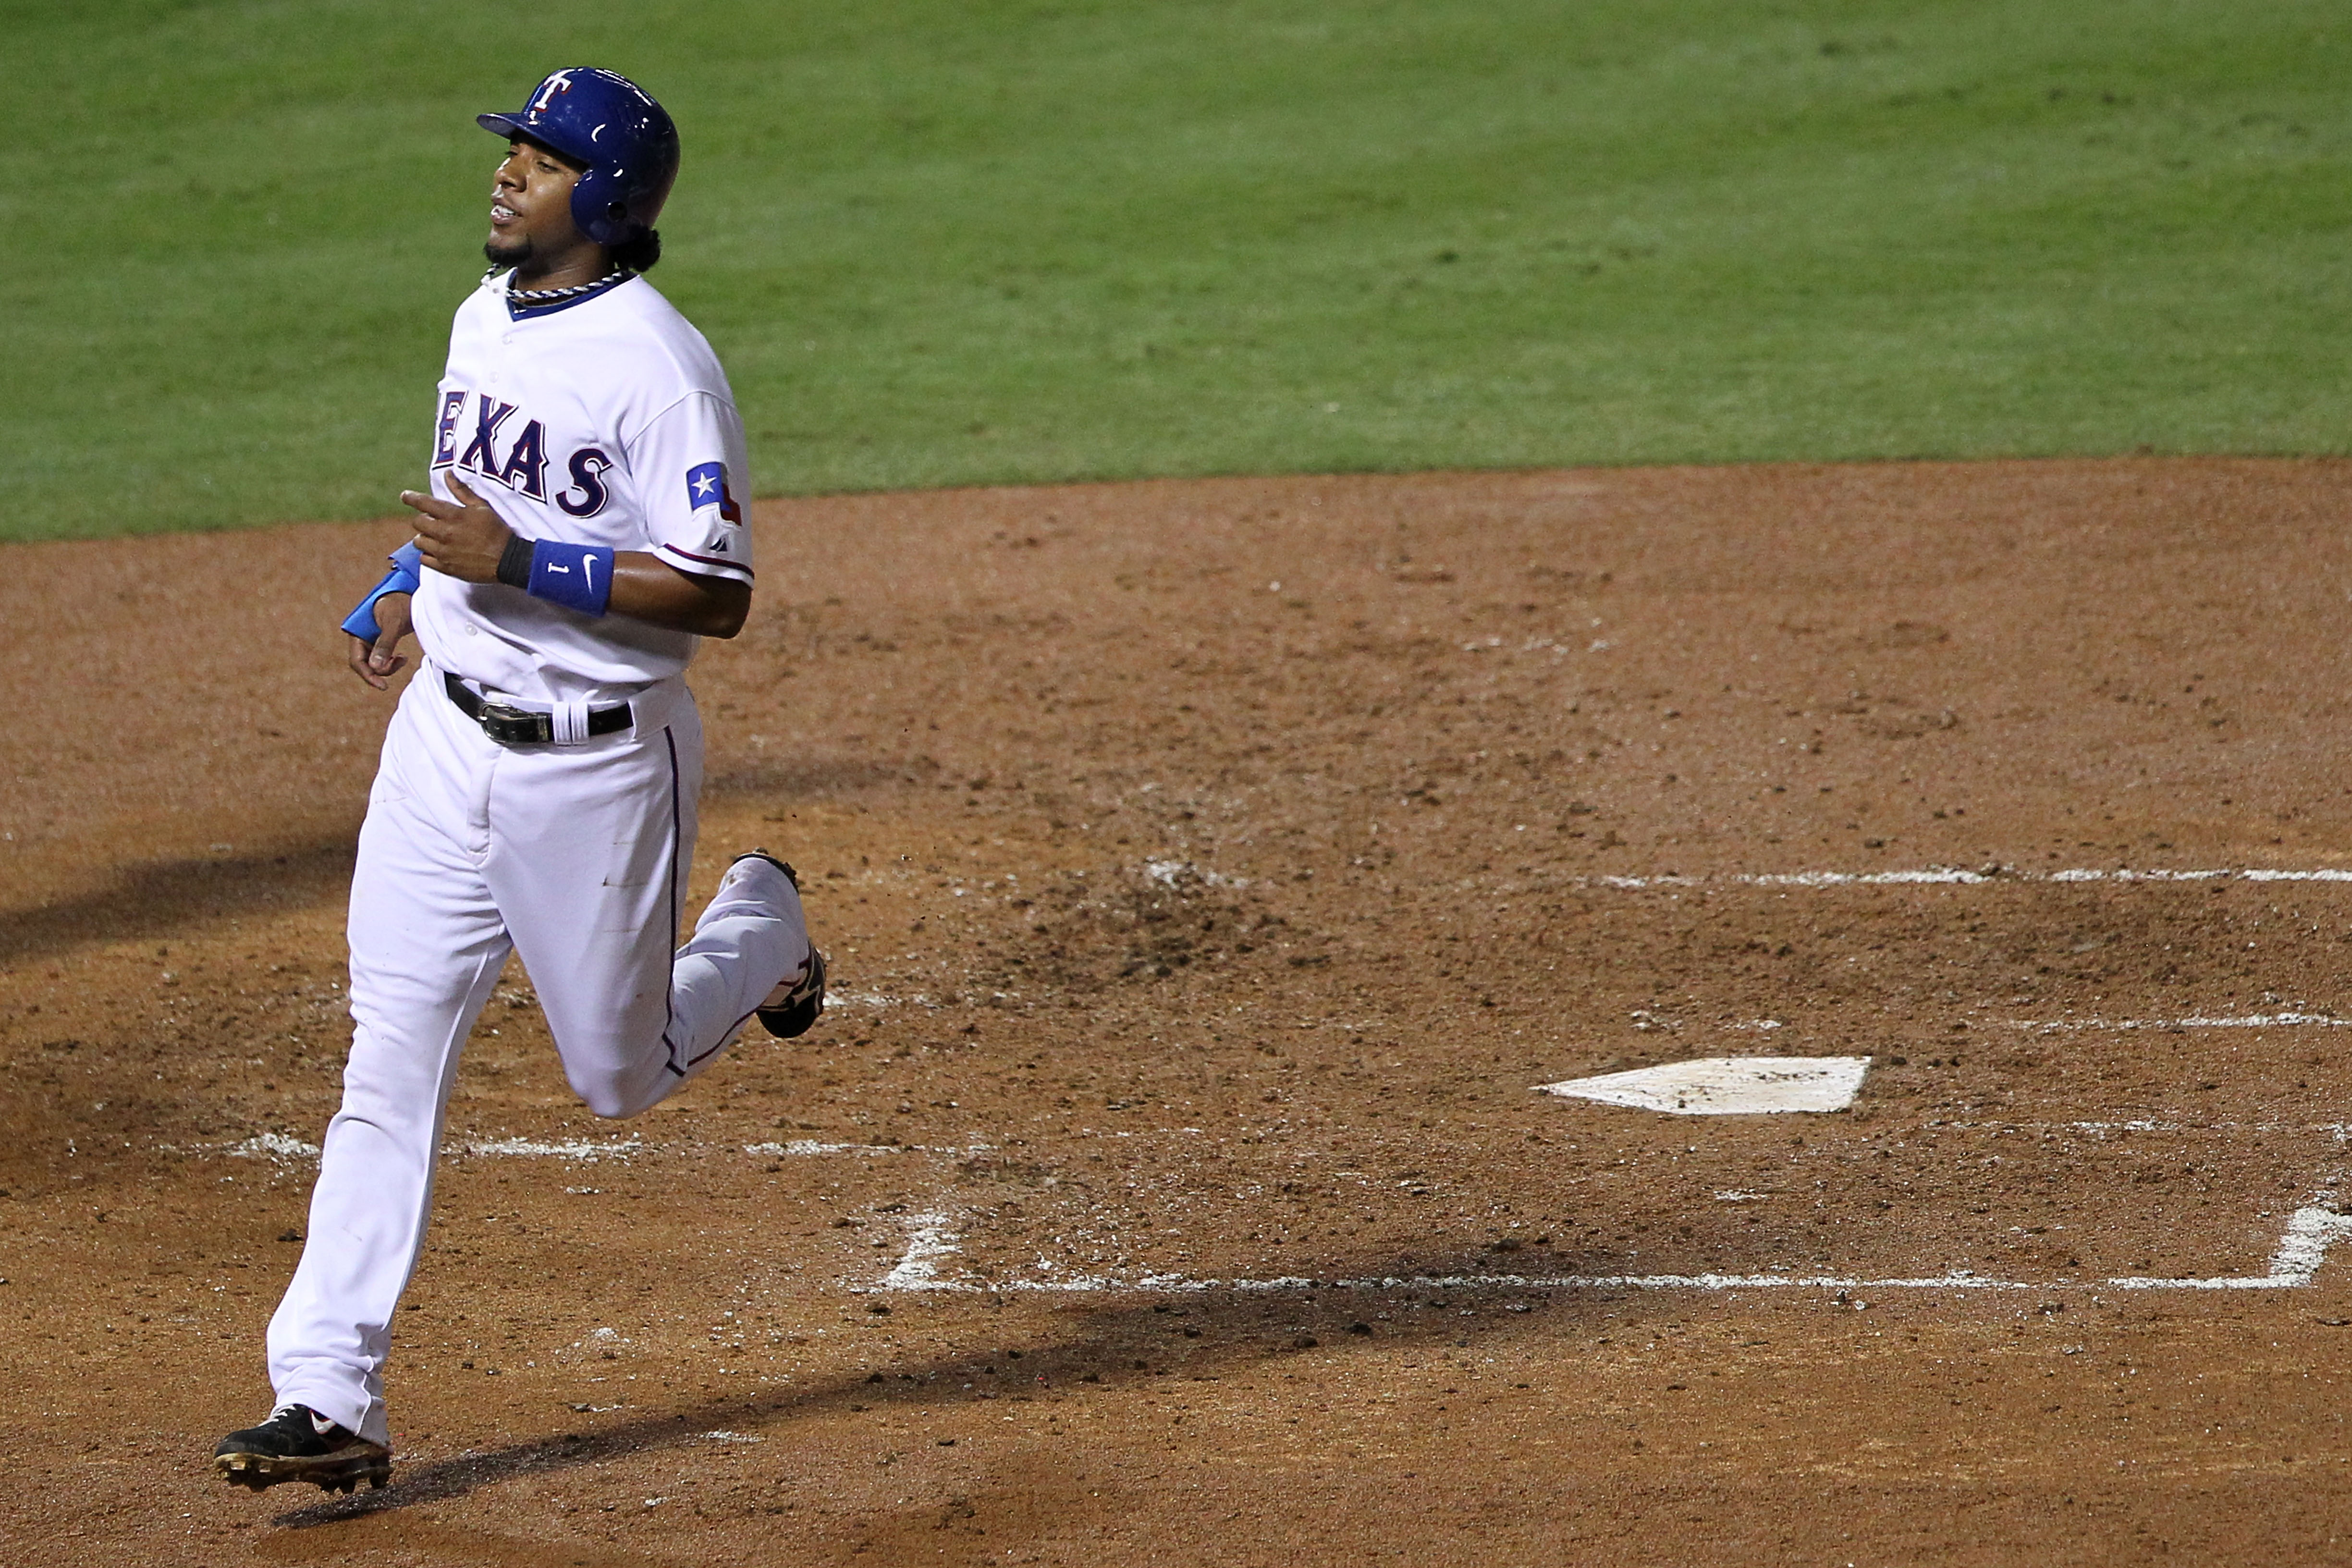 Who will be baseball's next Ironman after Elvis Andrus?